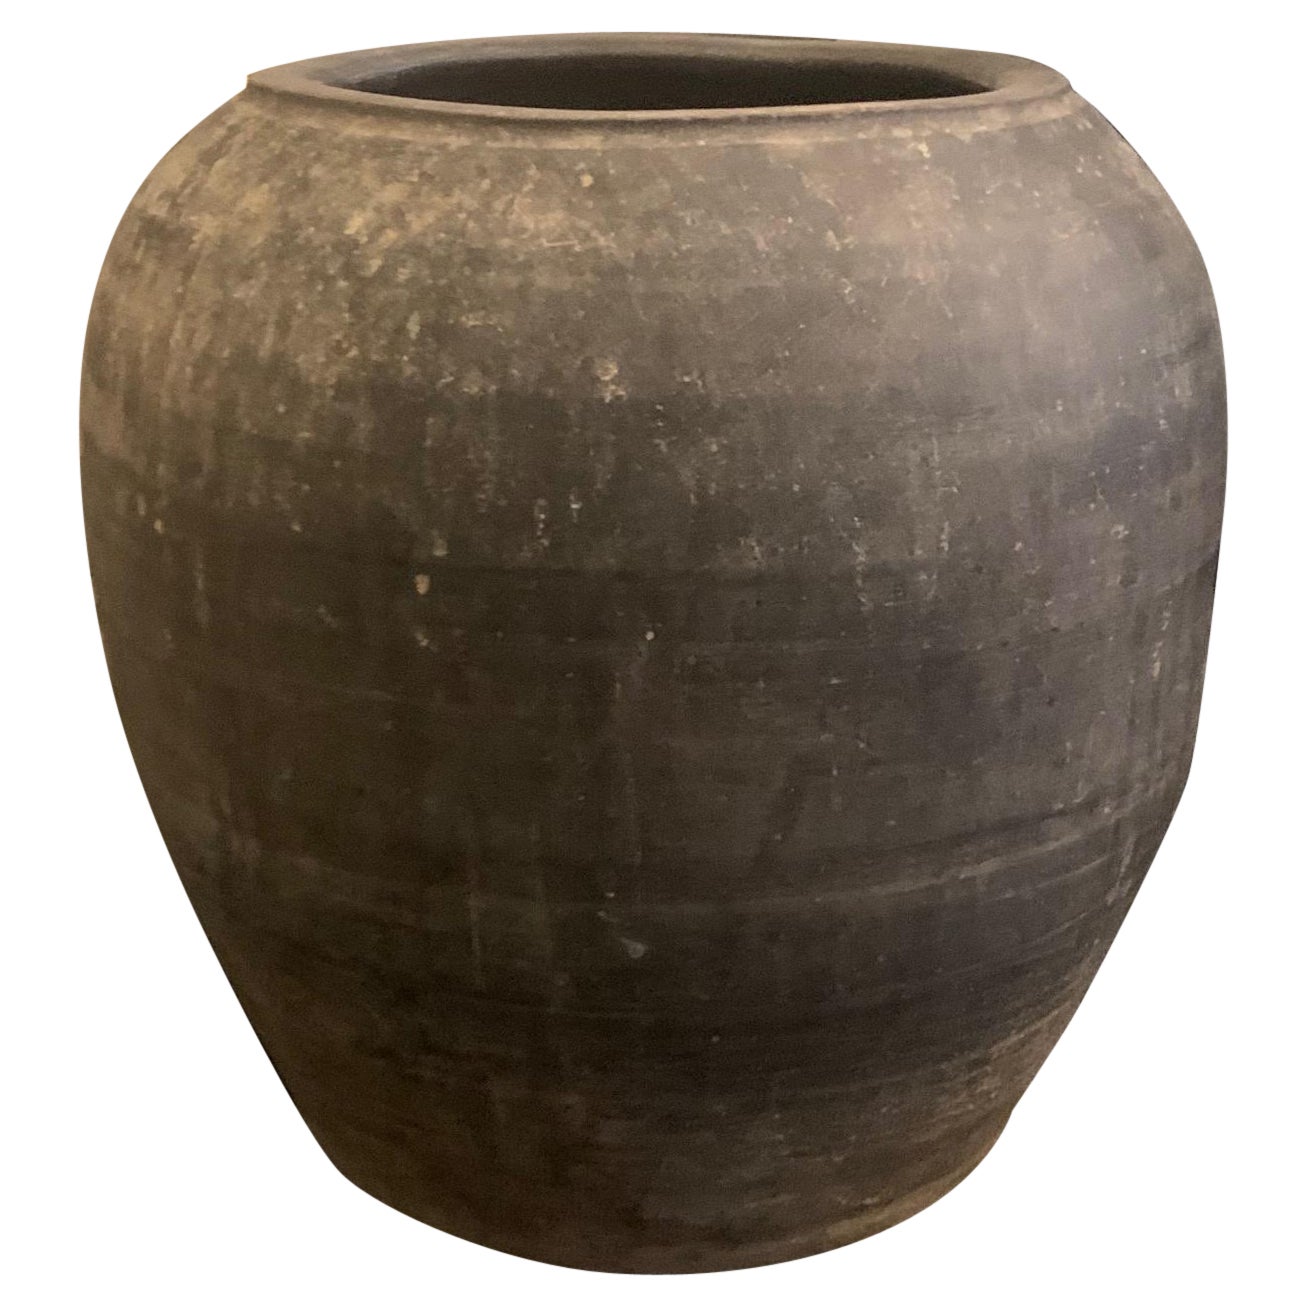 Charcoal Grey Weathered Terracotta Large Pot, China, 20th Century